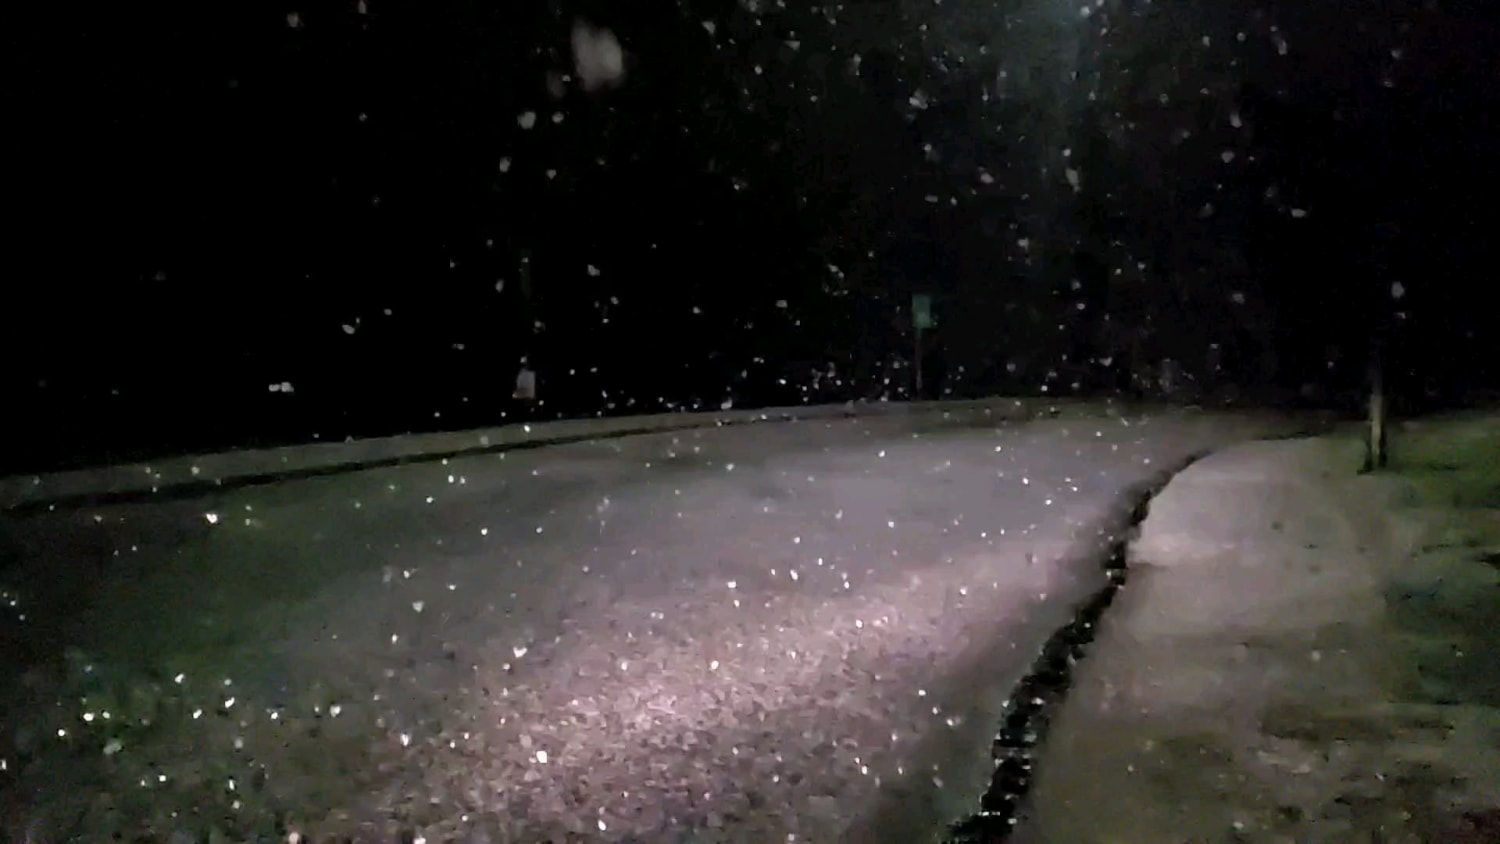 Giant Snowflakes falling in slow motion. Top of Capitol Hill in Burnaby at 12am this morning.